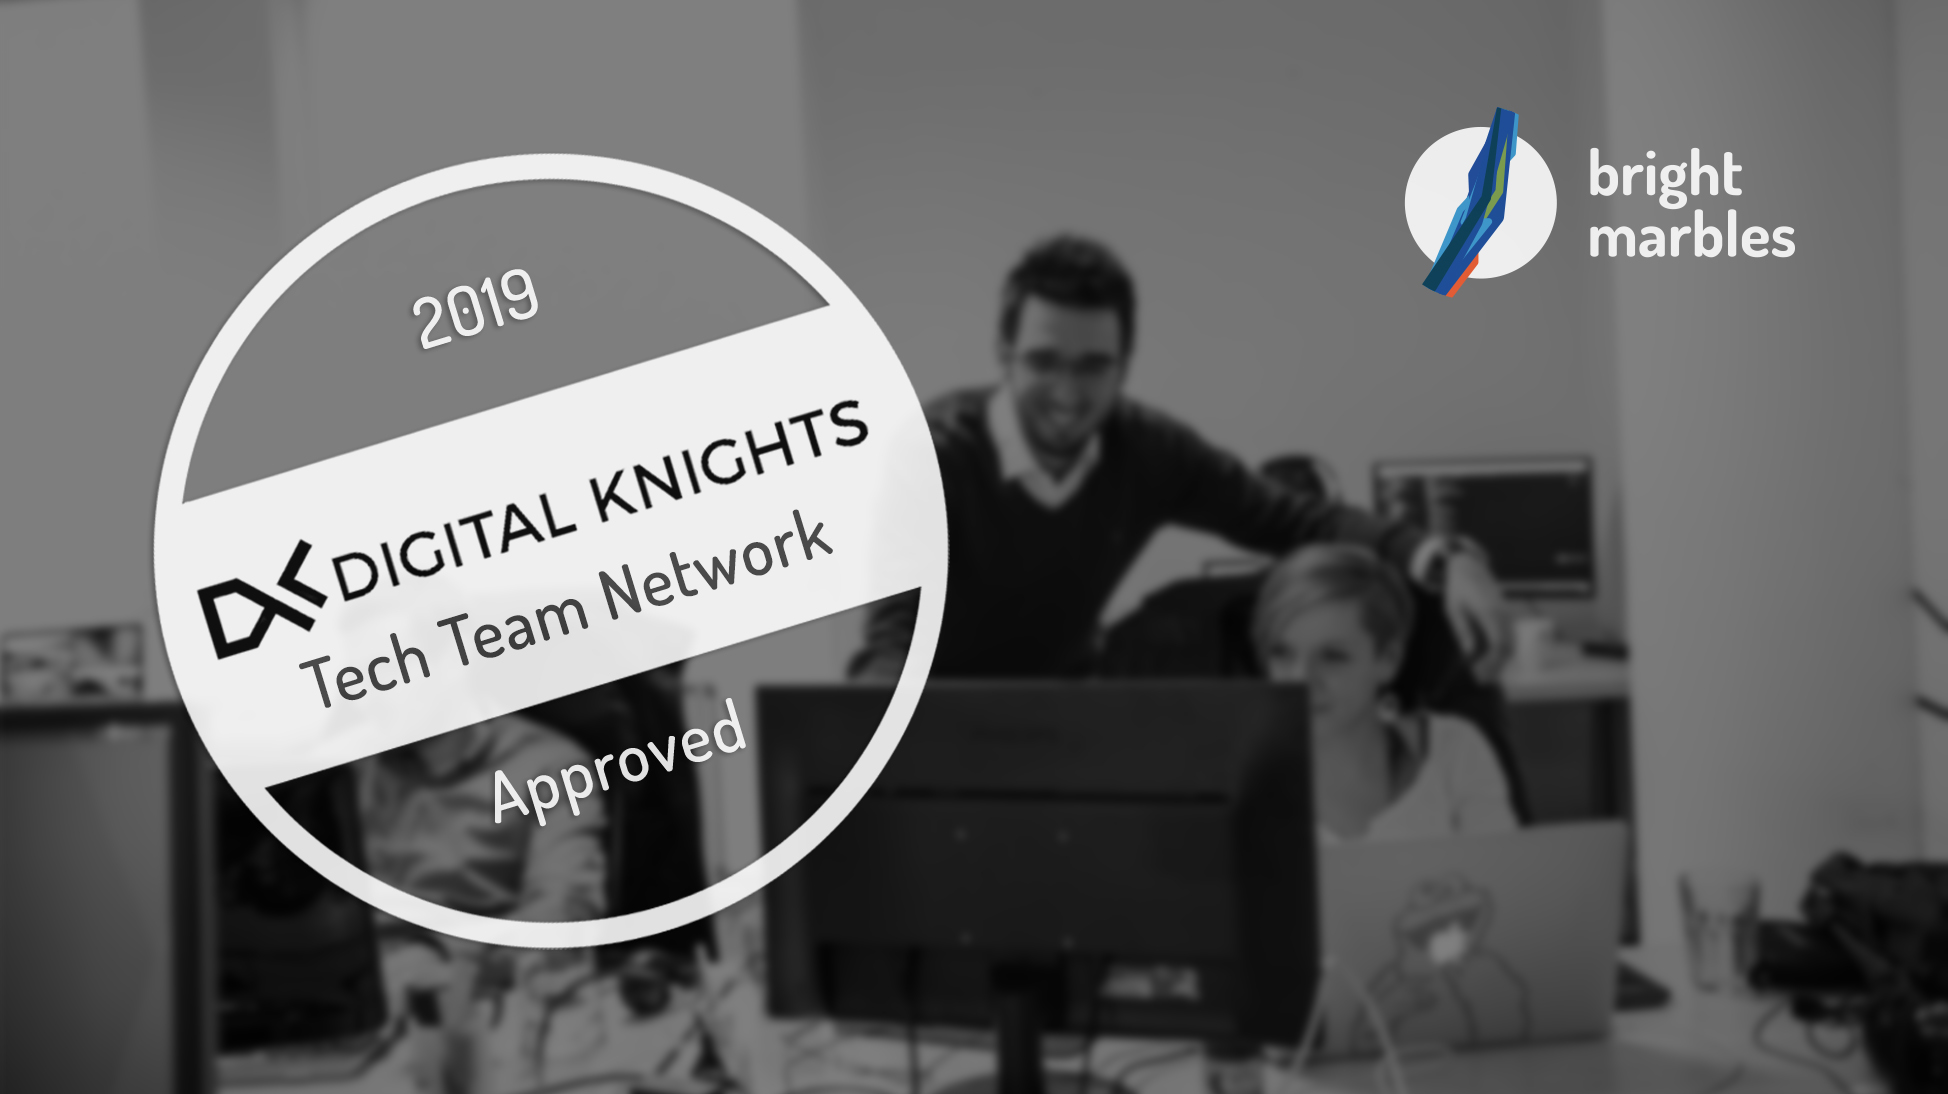 BrightMarbles welcomed into the Digital Knights Network